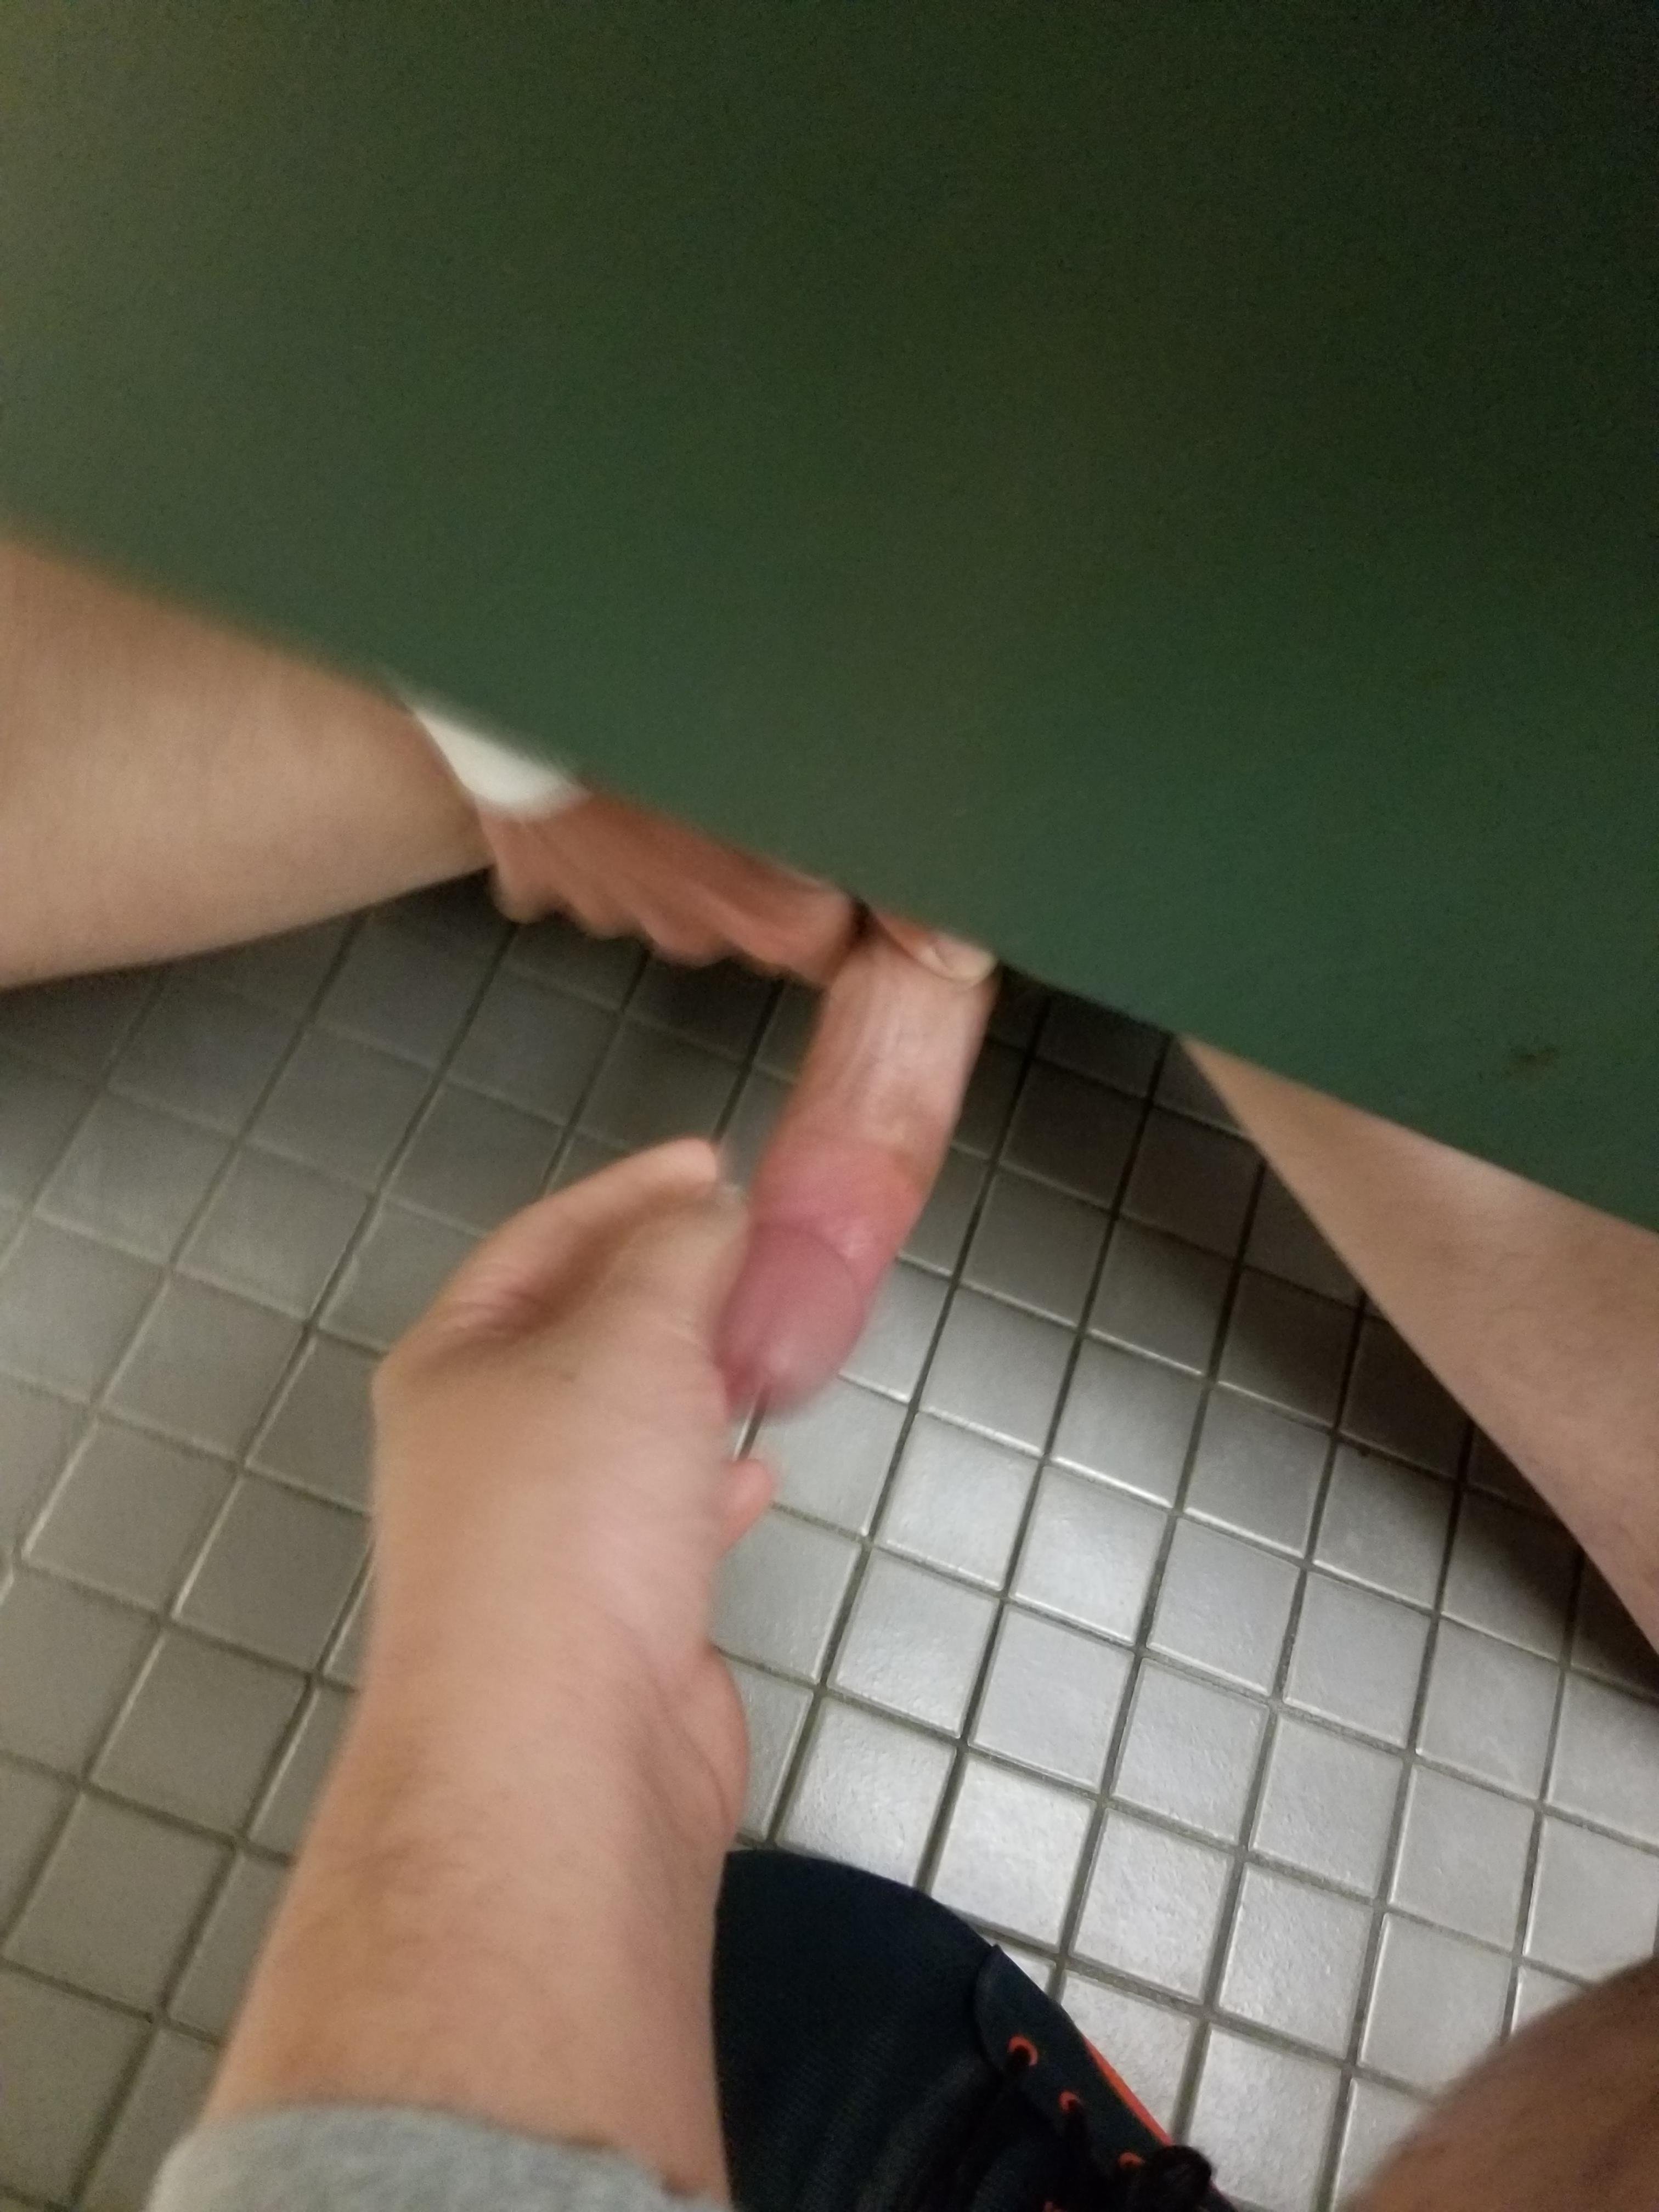 Sorry for the blur, first time I sucked a dick understall